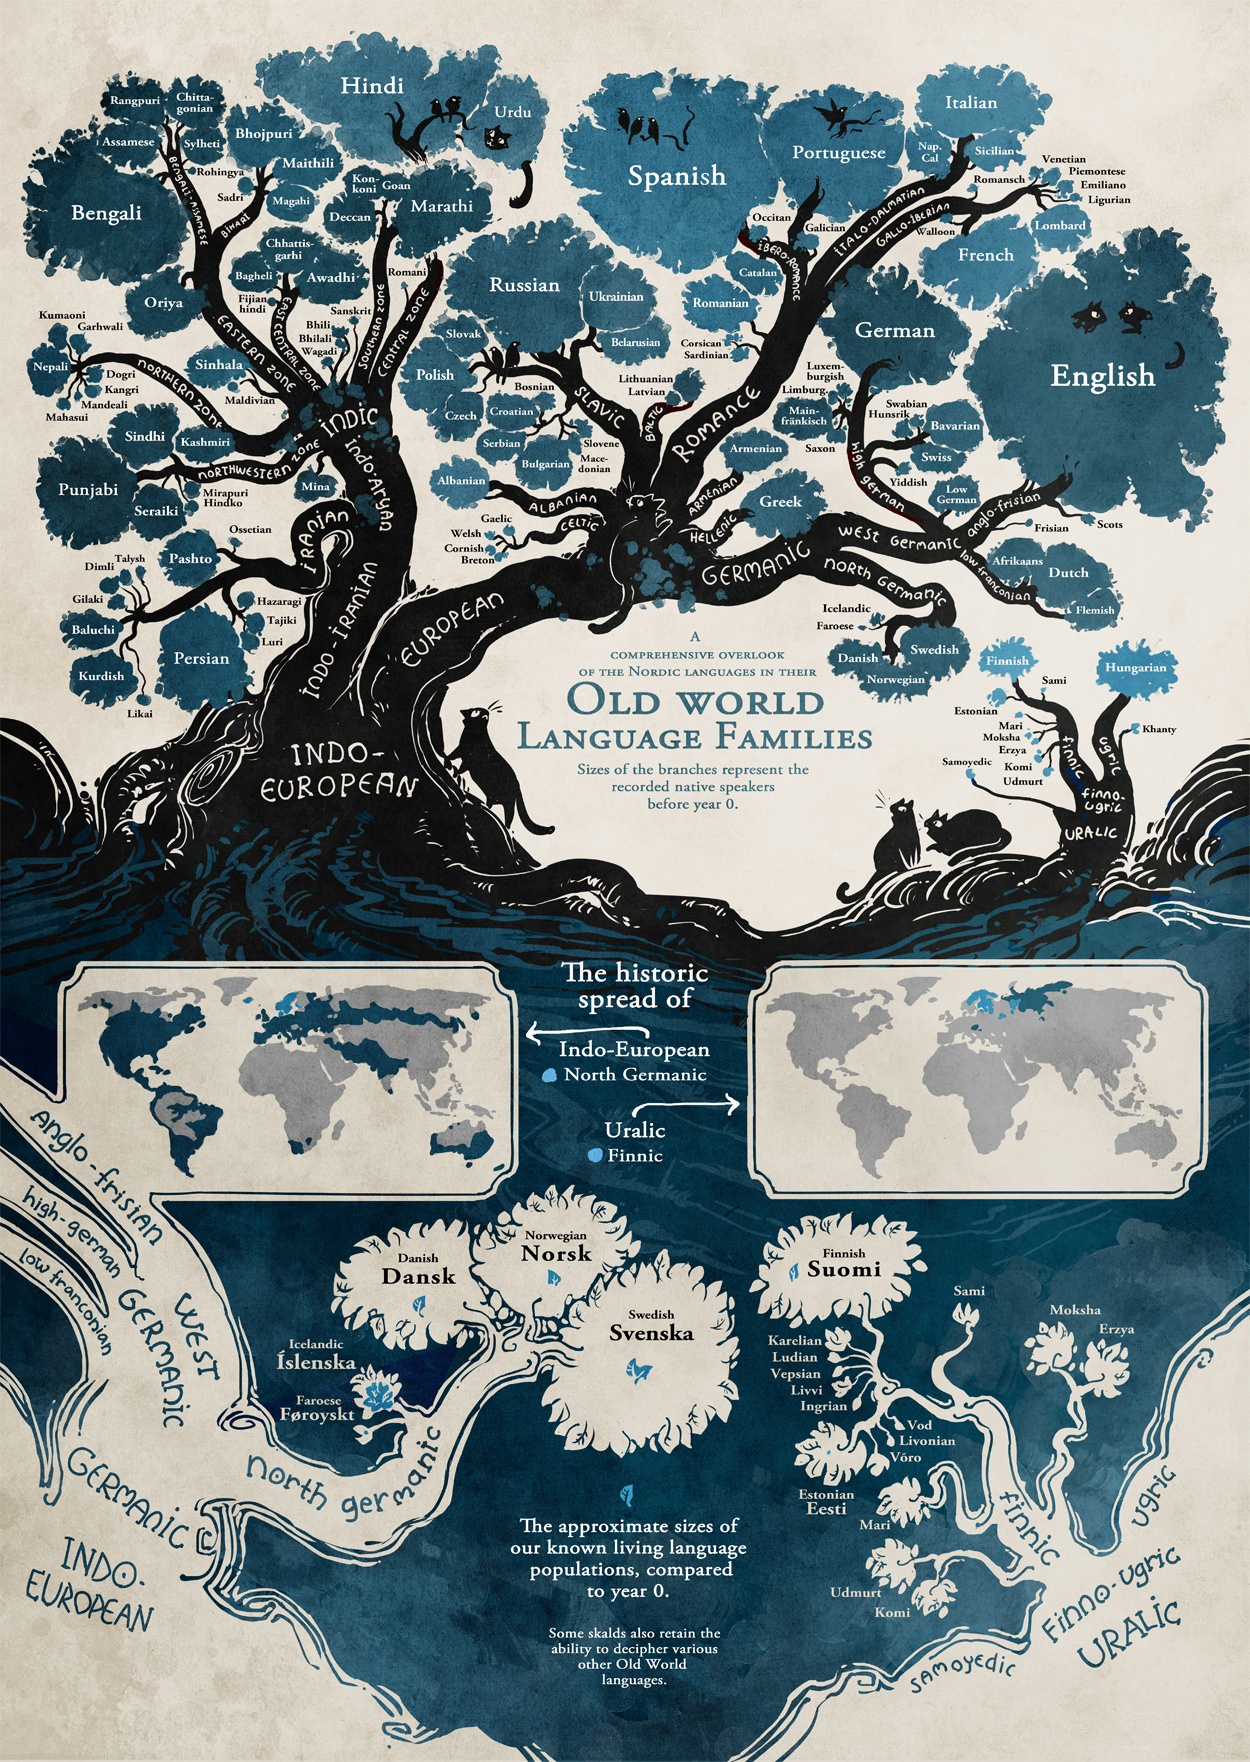 The Tree of Languages Illustrated in a Big, Beautiful Infographic